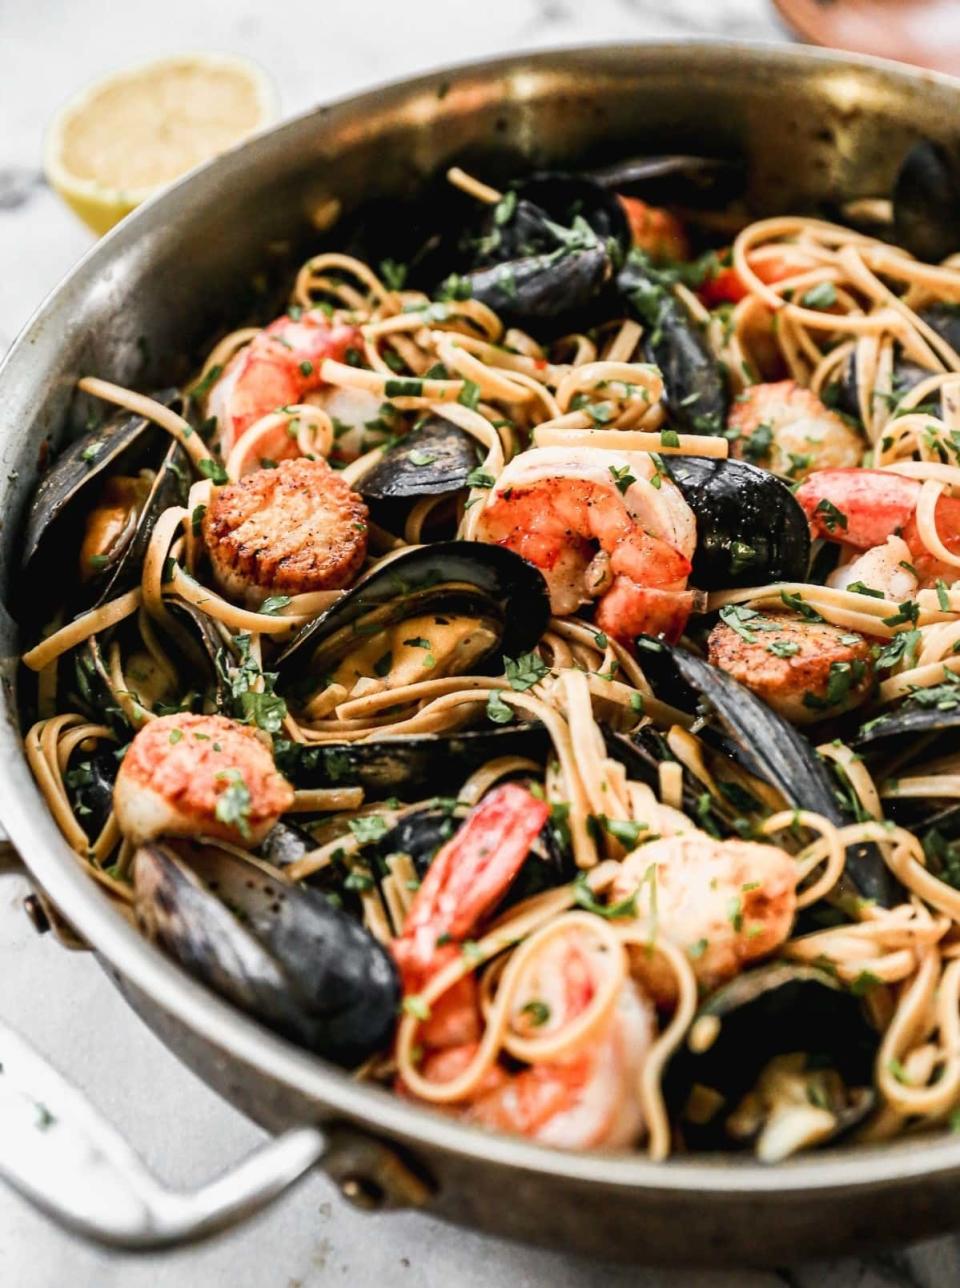 A skillet filled with seafood pasta, including shrimp and mussels, garnished with slices of lemon